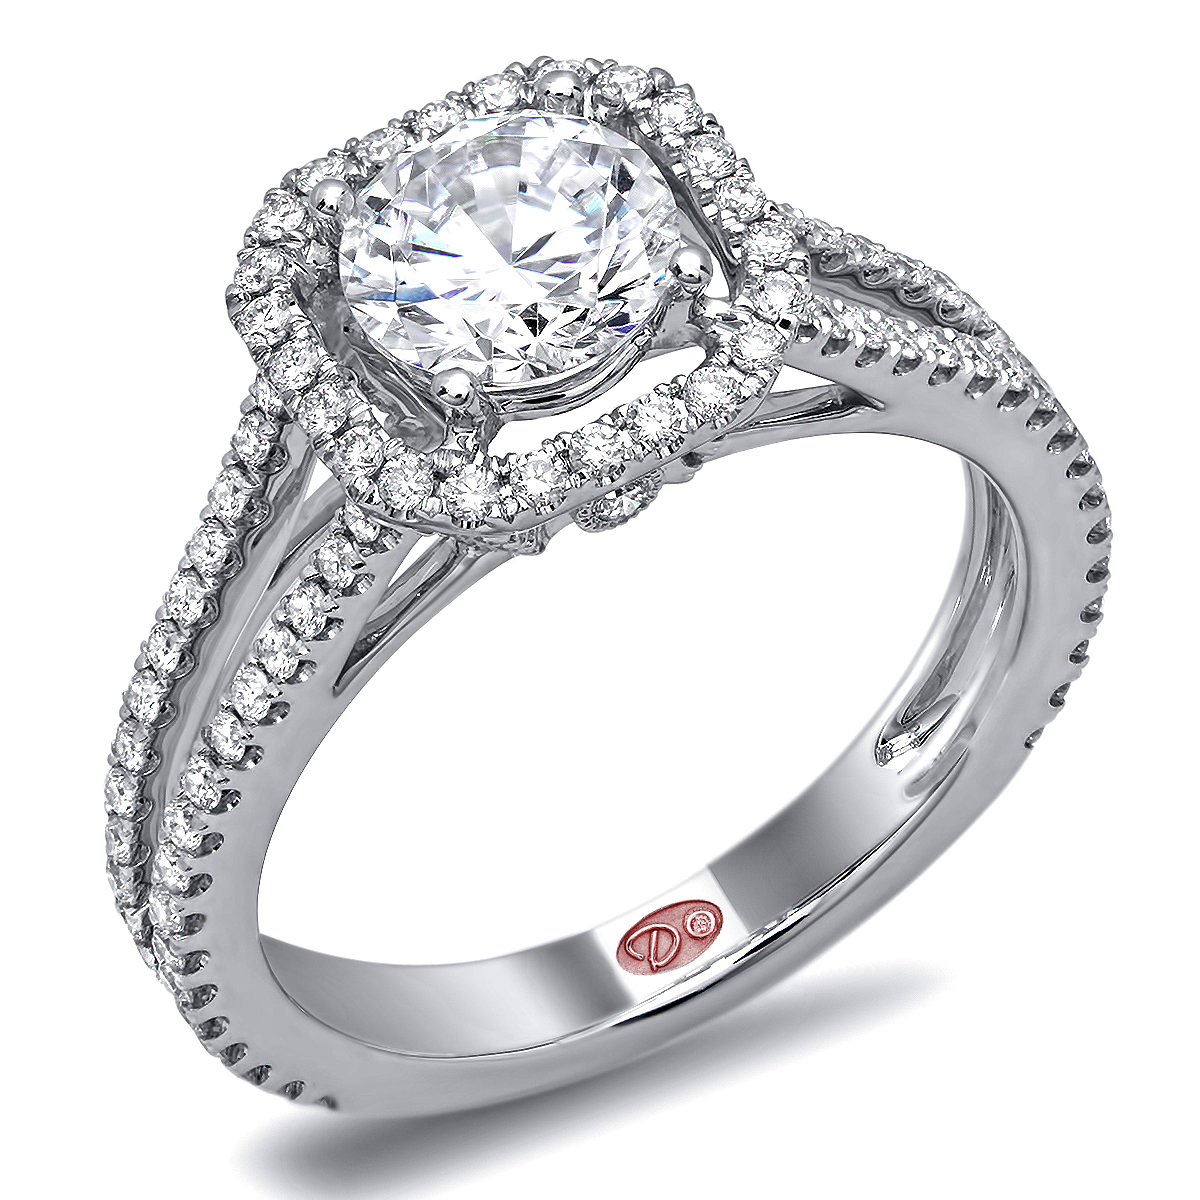 ... of Designer Engagement Rings from Demarco is available in Edmonton at